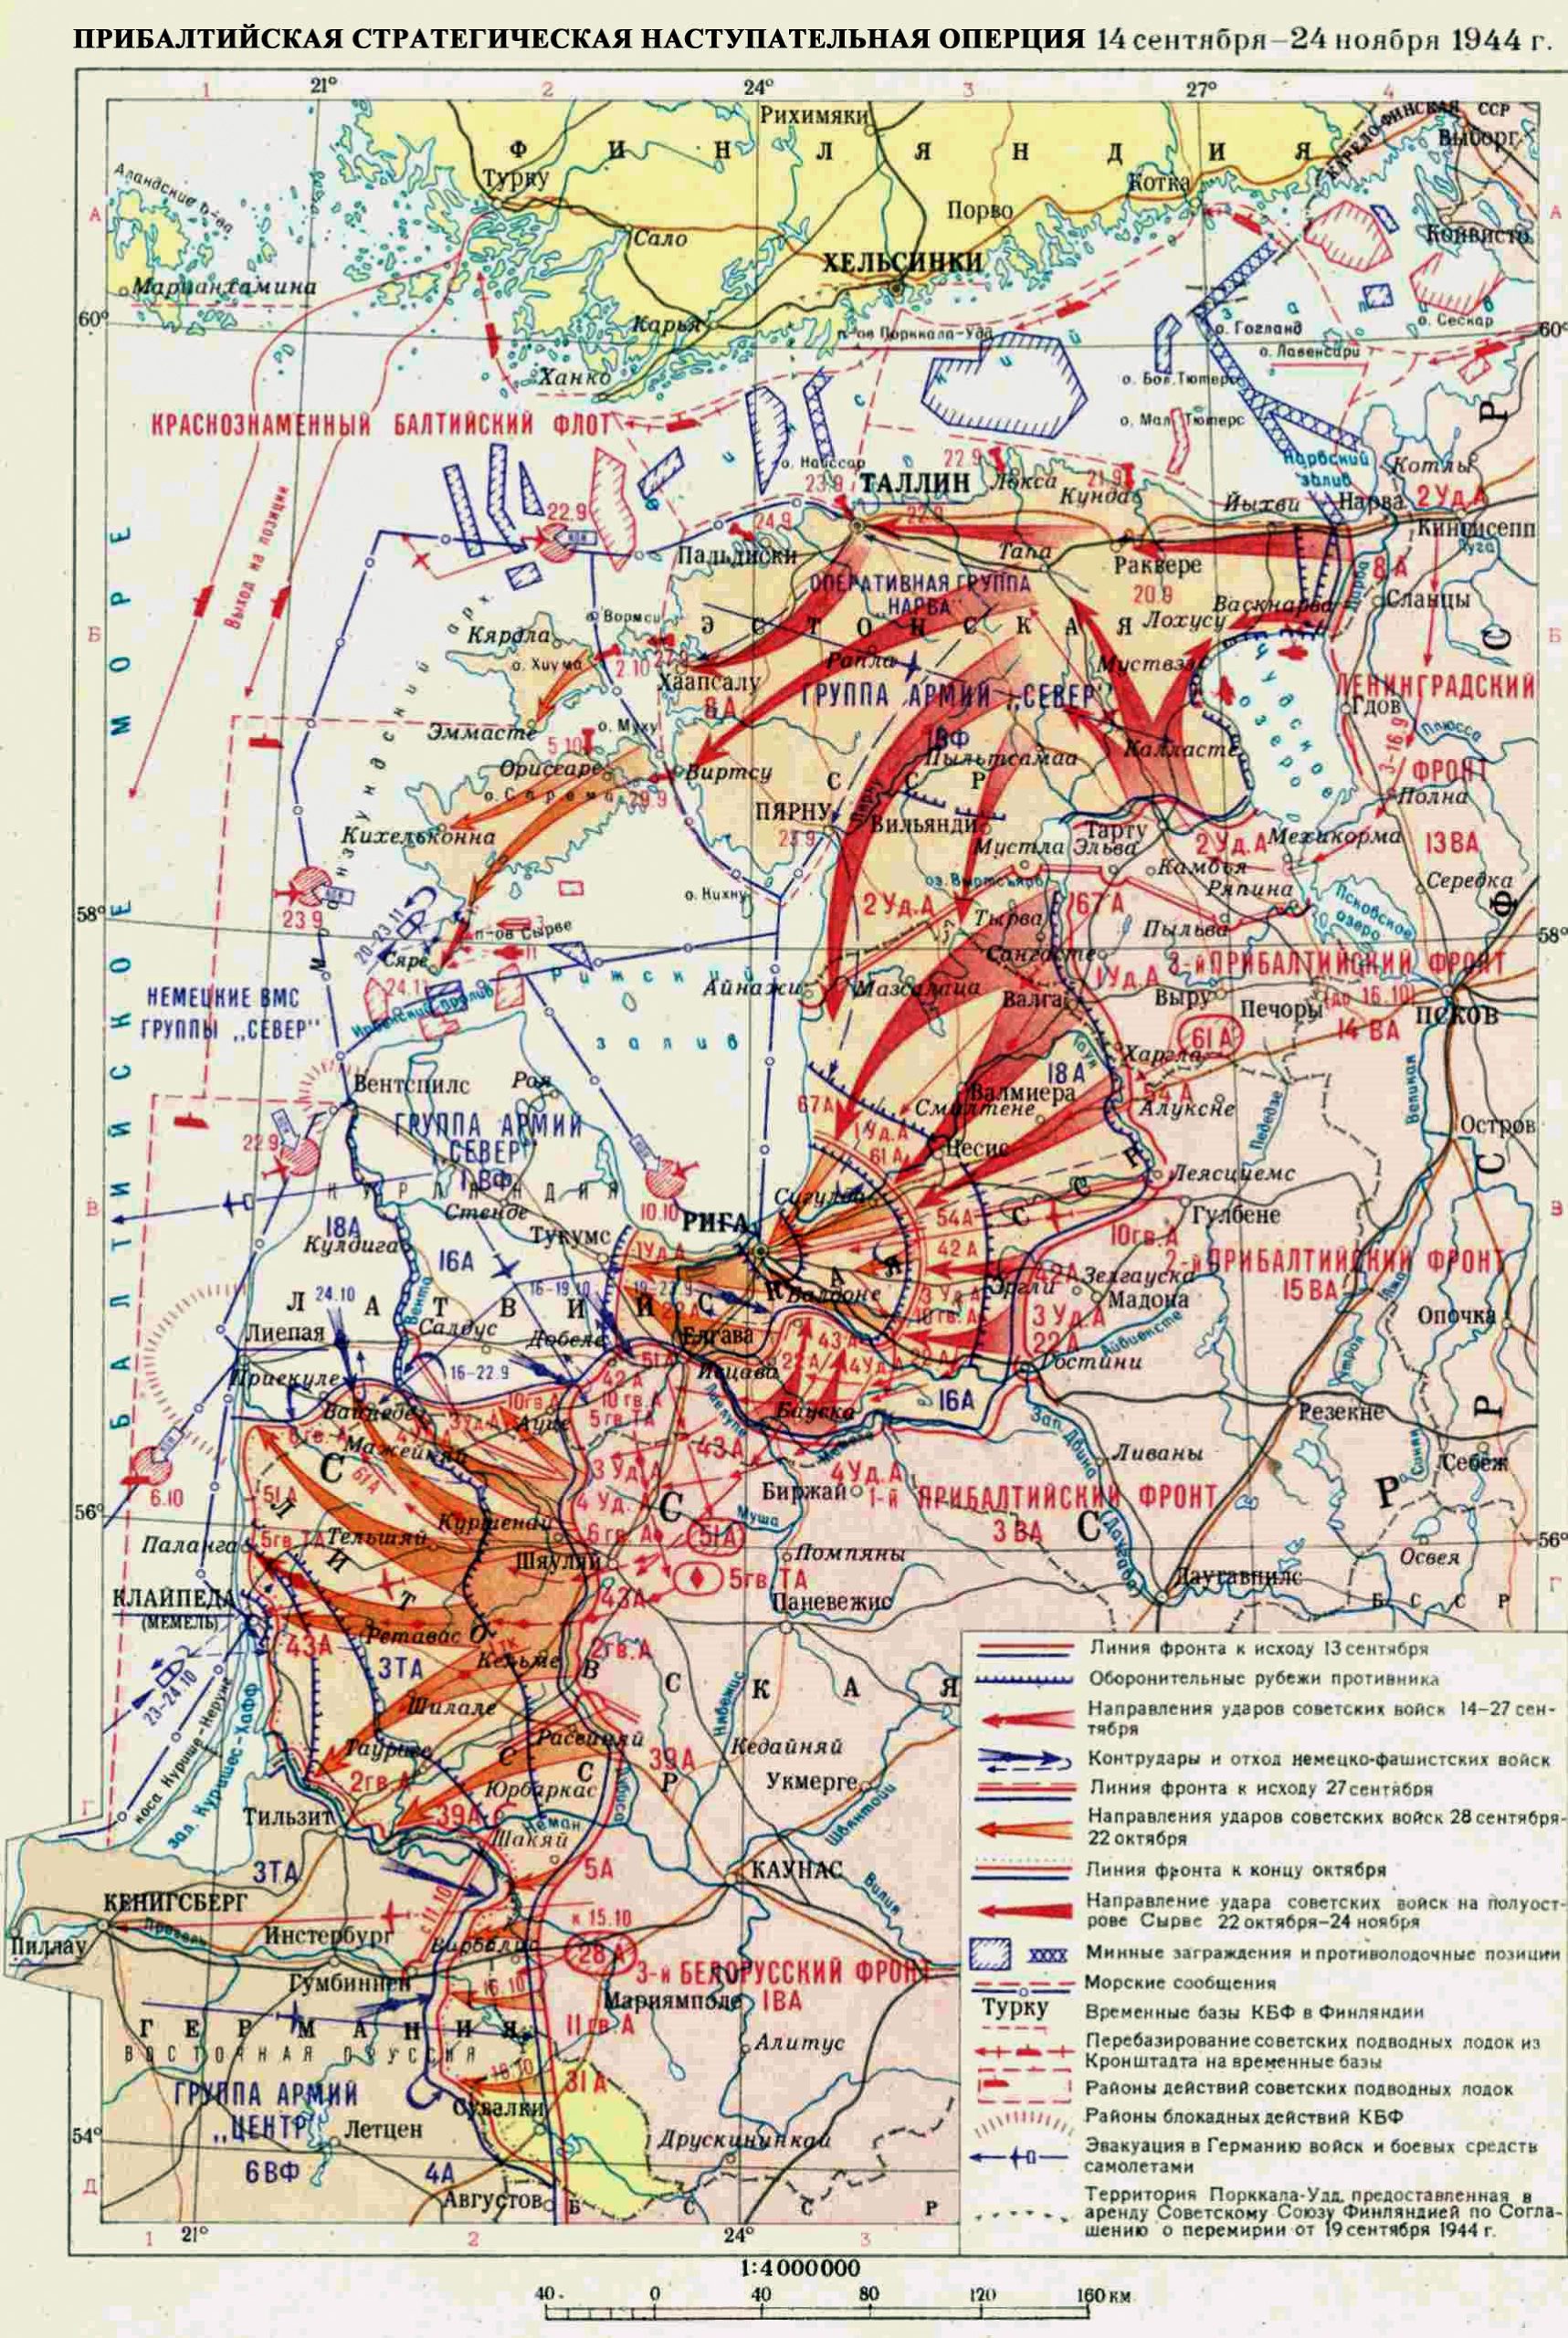 Liberation of the Baltic states by the Red Army, part 2